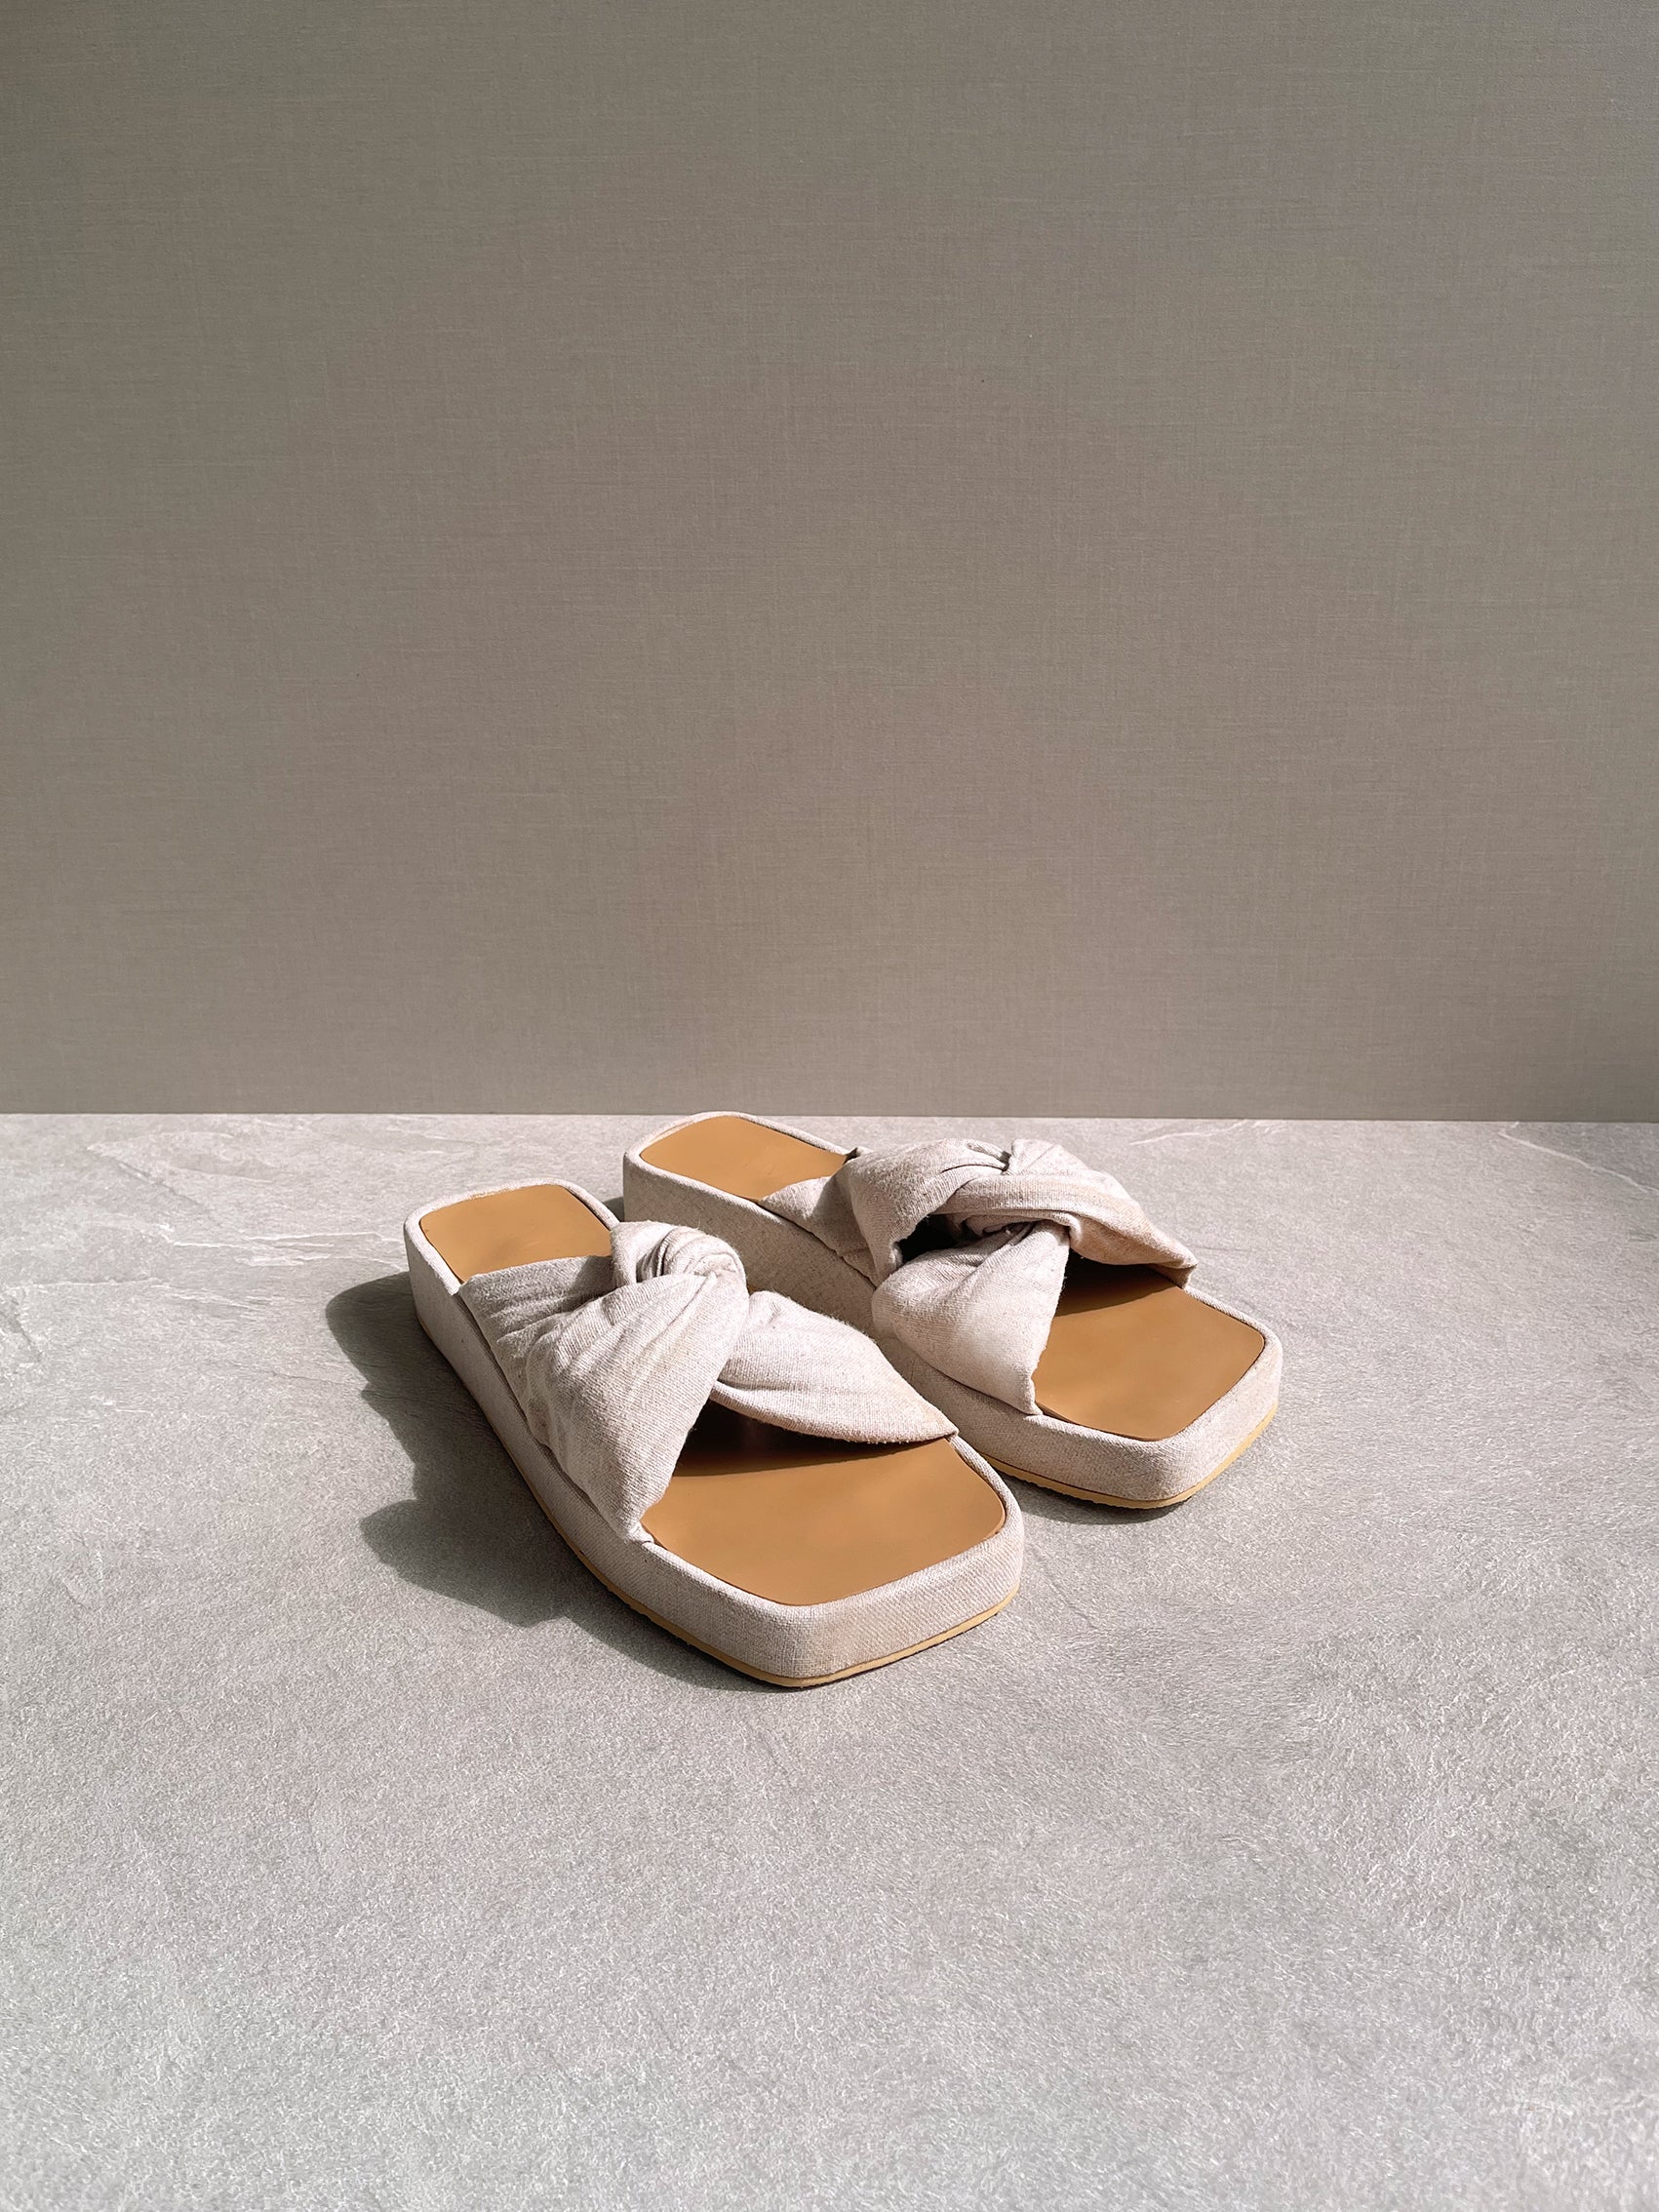 Clay Sandals In Sand